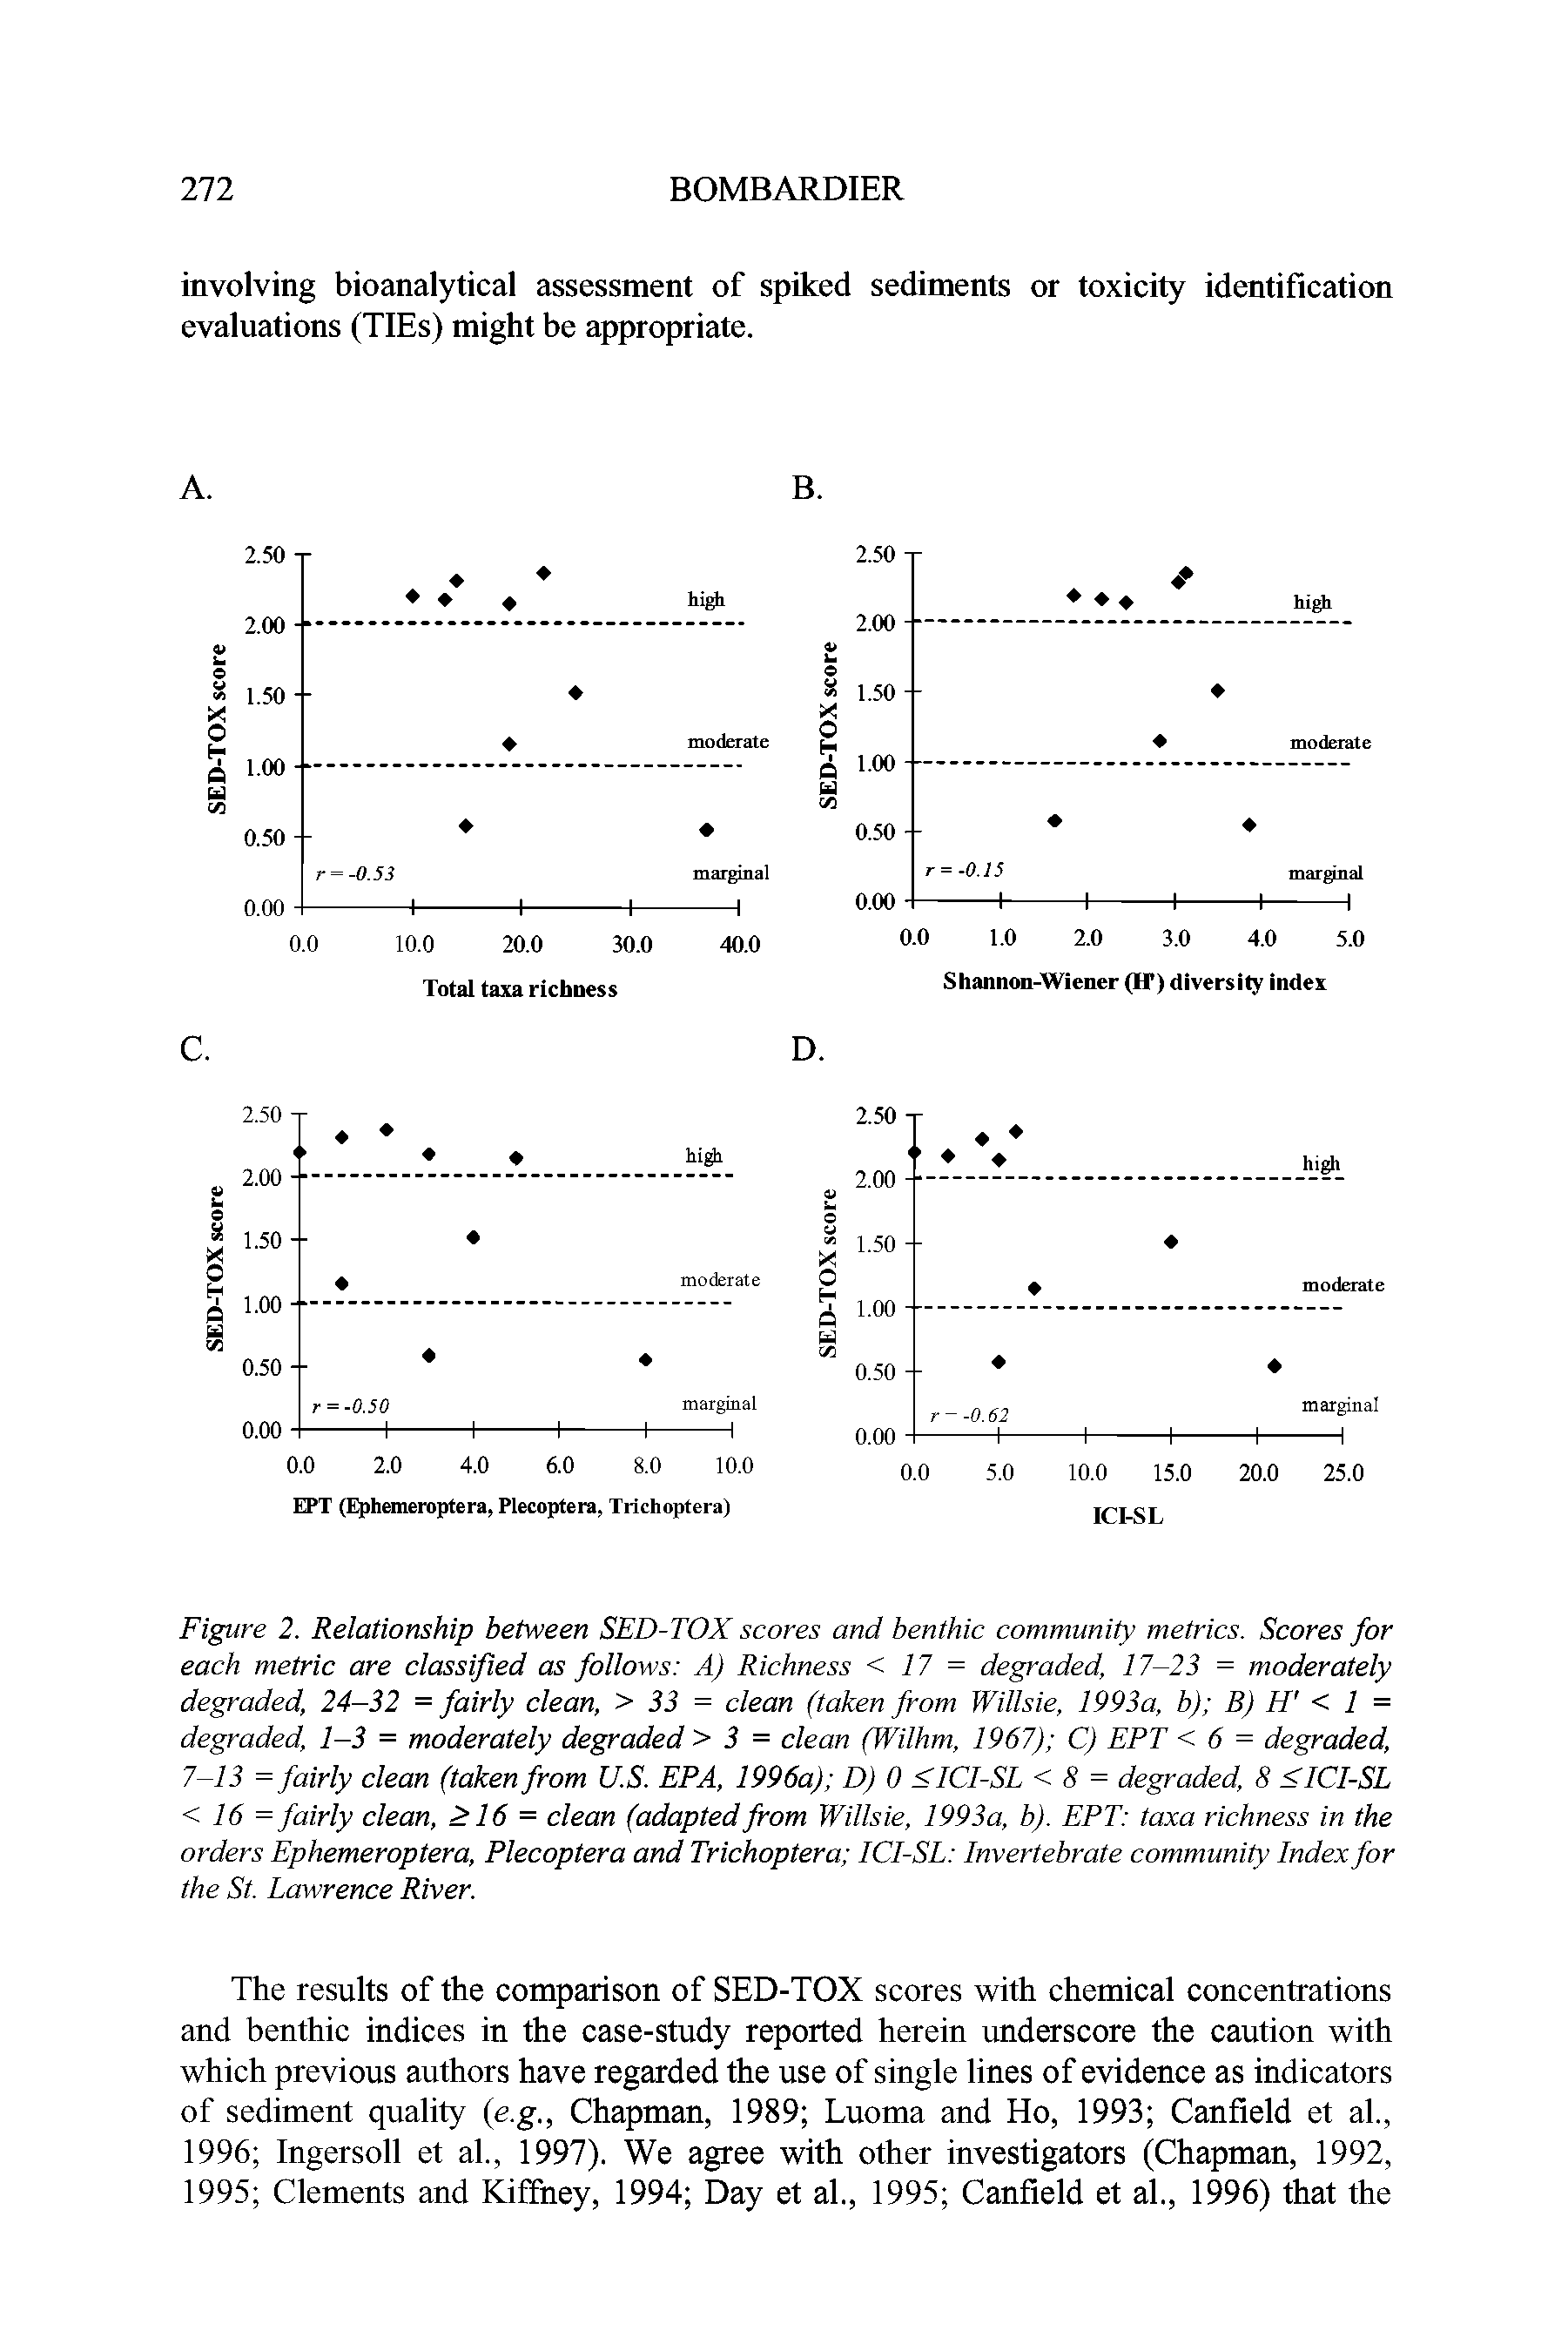 Figure 2. Relationship between SED-TOX scores and benthic community metrics. Scores for each metric are classified as follows A) Richness < 17 = degraded, 17-23 = moderately degraded, 24-32 = fairly clean, > 33 = clean (taken from Willsie, 1993a, b) B) H < 1 = degraded, 1-3 = moderately degraded > 3 = clean (Wilhm, 1967) C) EPT < 6 = degraded, 7-13 = fairly clean (taken from U.S. EPA, 1996a) D) 0 <ICI-SL < 8 = degraded, 8 <ICI-SL < 16 = fairly clean, >16 = clean (adapted from Willsie, 1993a, b). EPT taxa richness in the orders Ephemeroptera, Plecoptera and Trichoptera ICI-SL Invertebrate community Index for the St. Lawrence River.